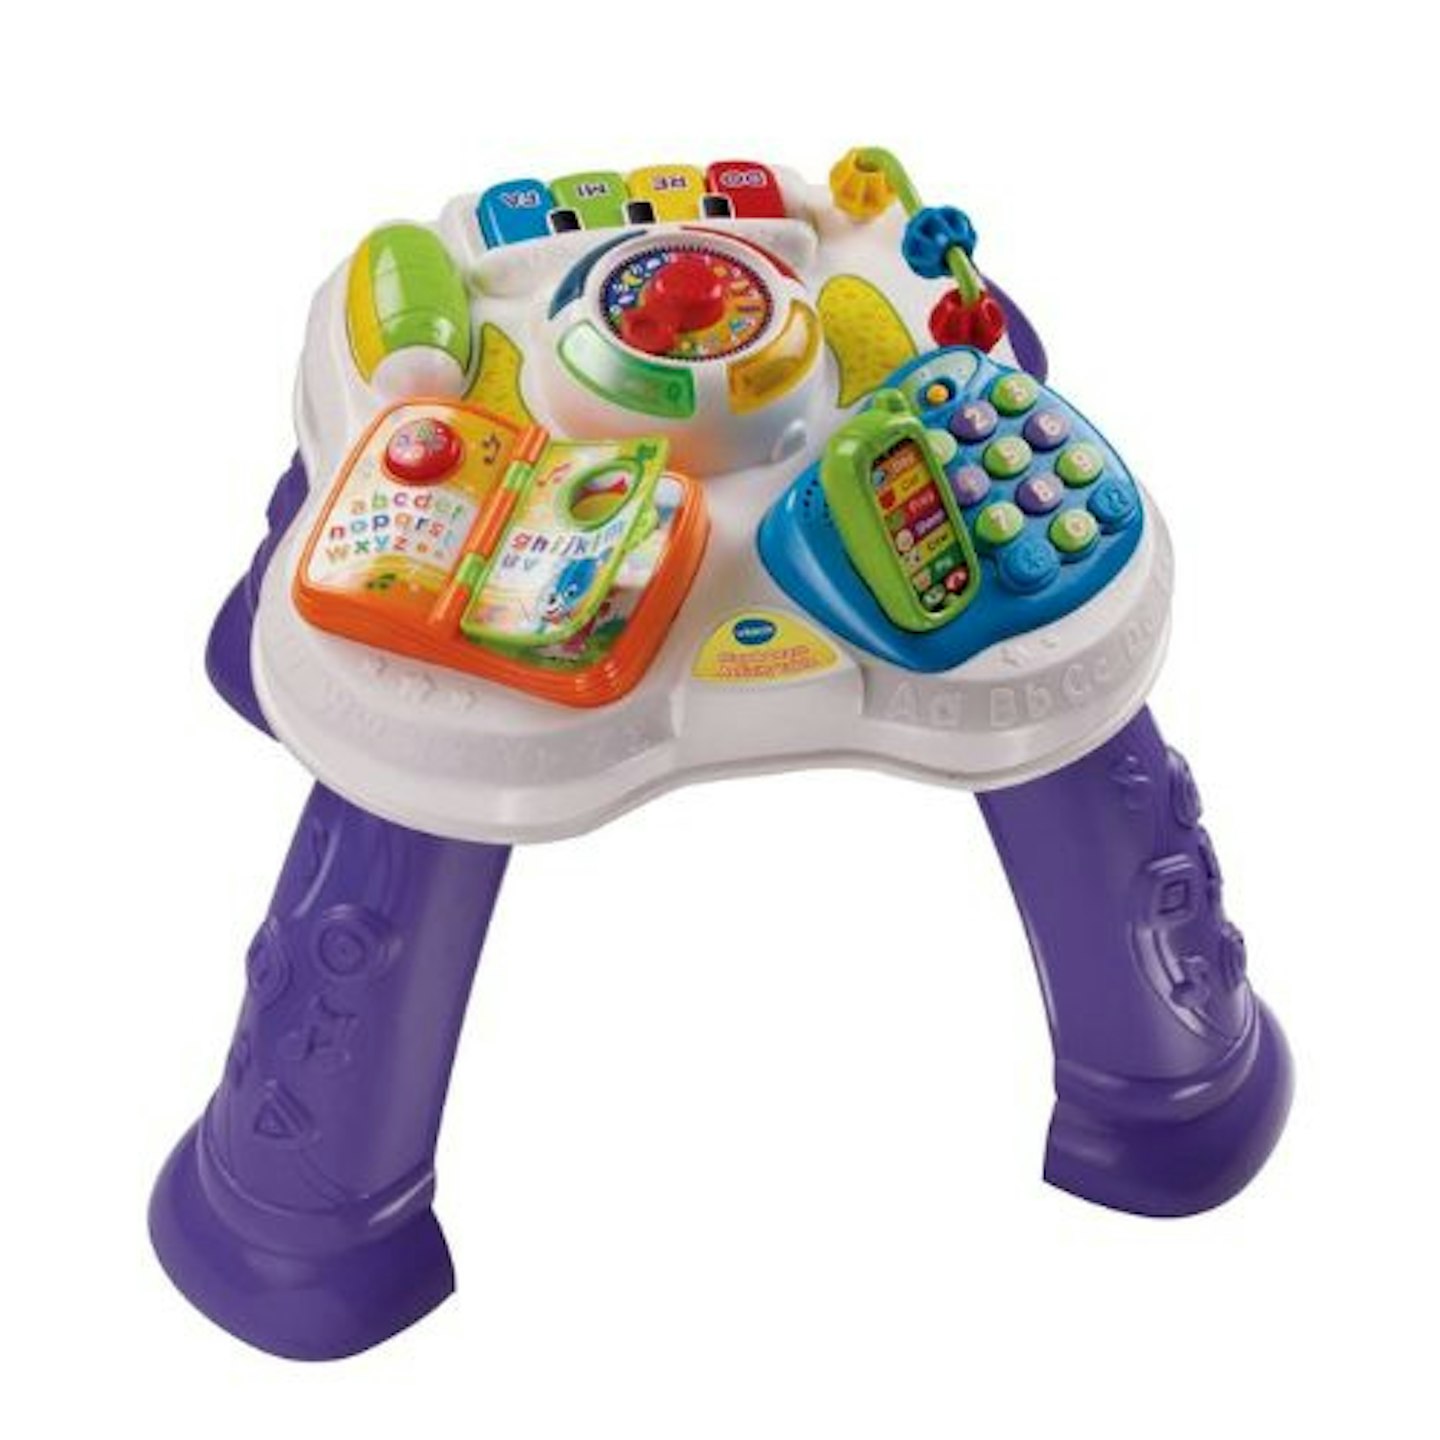 Vtech Play And Learn Activity Table